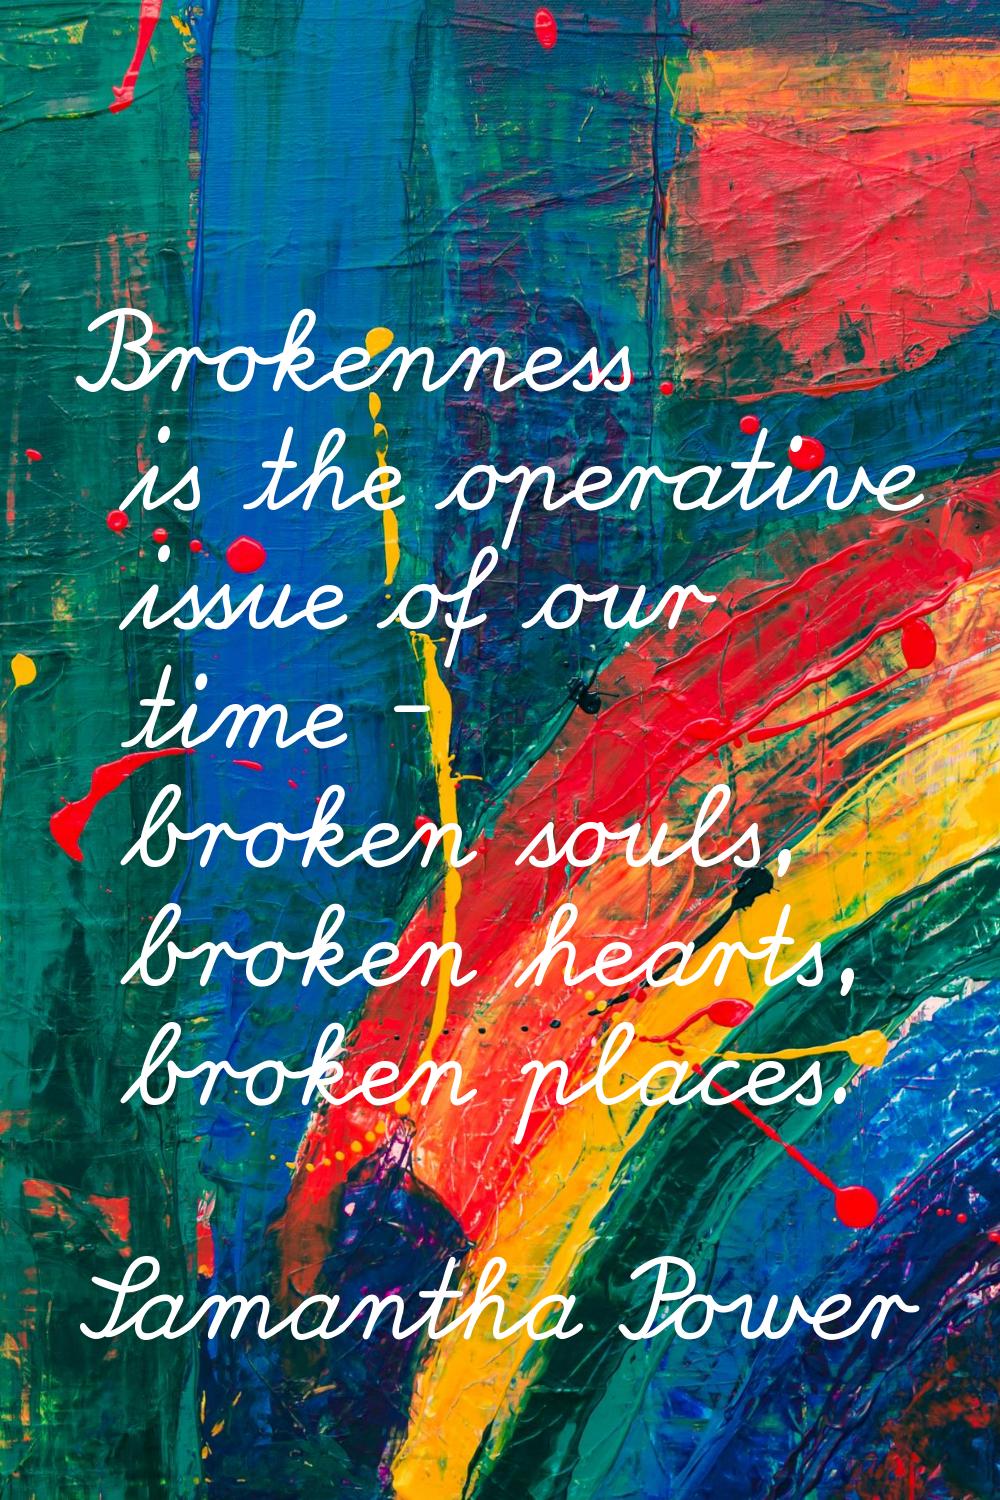 Brokenness is the operative issue of our time - broken souls, broken hearts, broken places.